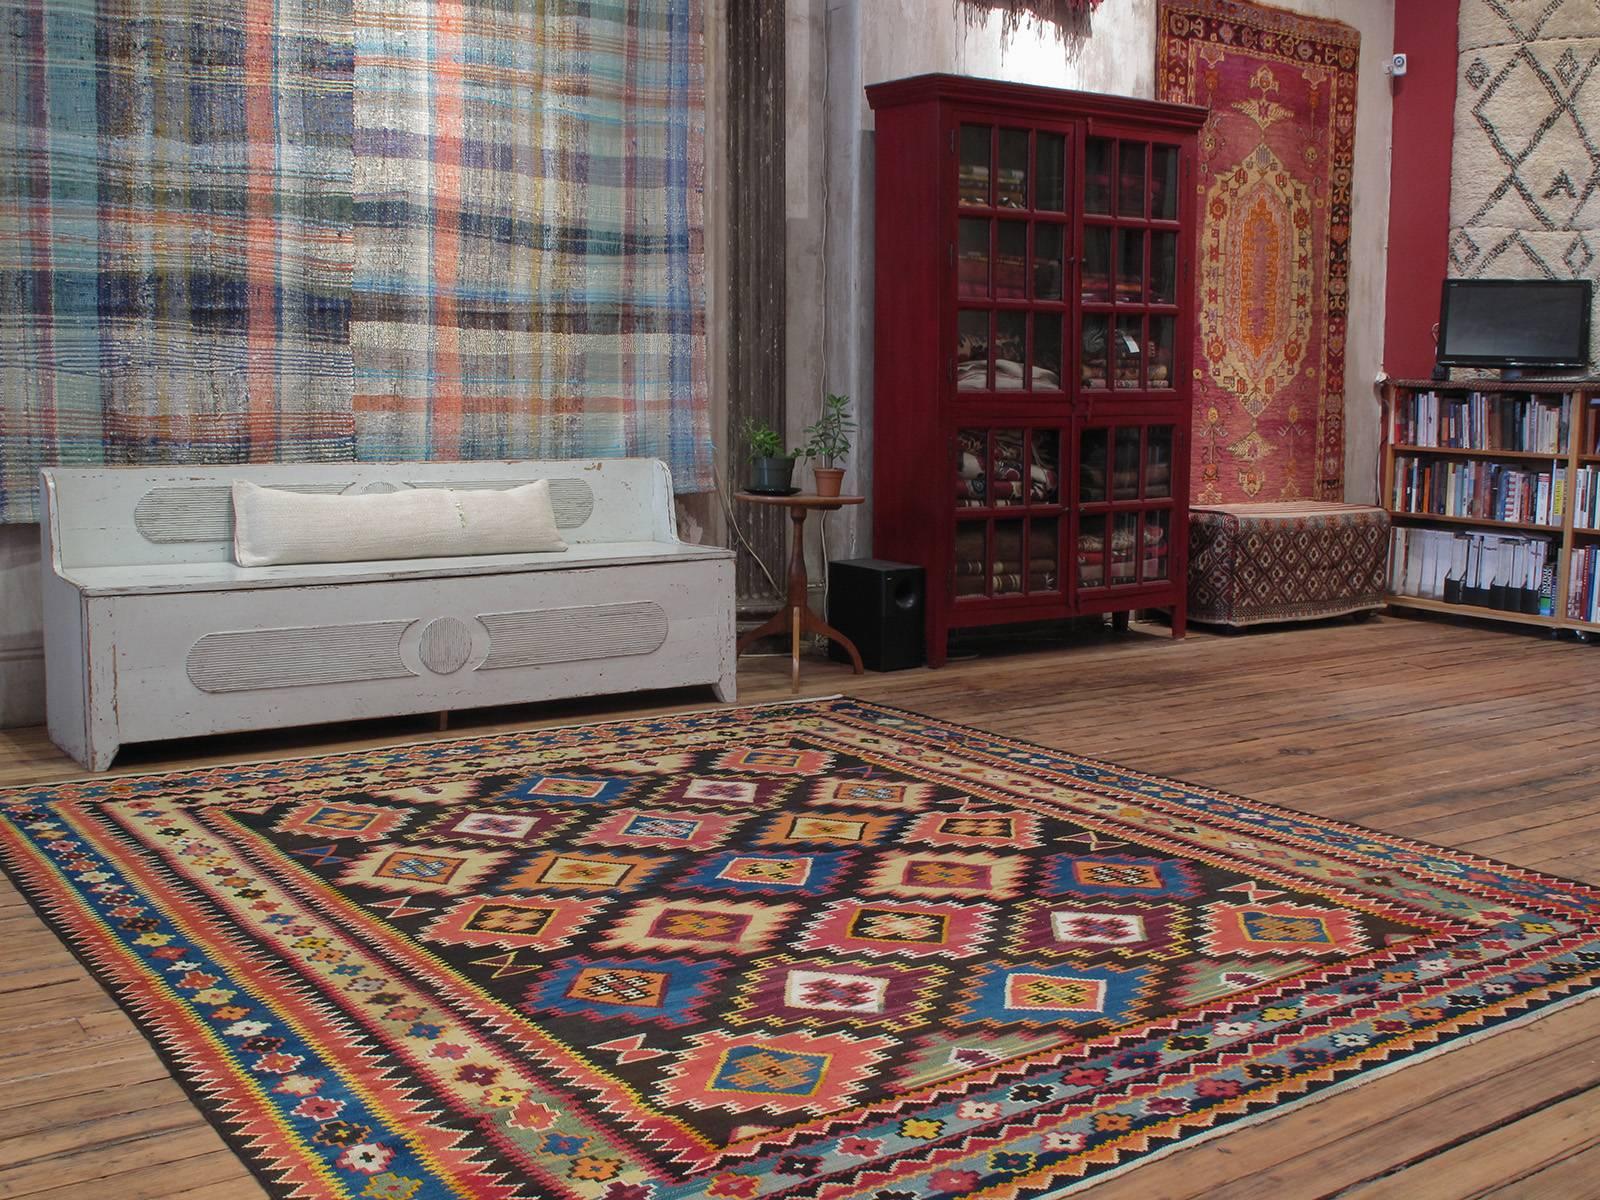 Large Azeri Kilim rug. An unusually large and very sturdy flat-weave rug from Azerbaijan of relatively recent vintage, perhaps circa 1970s, woven in the style of old Kuba kilims, although the old ones are usually narrower and longer. The wool and